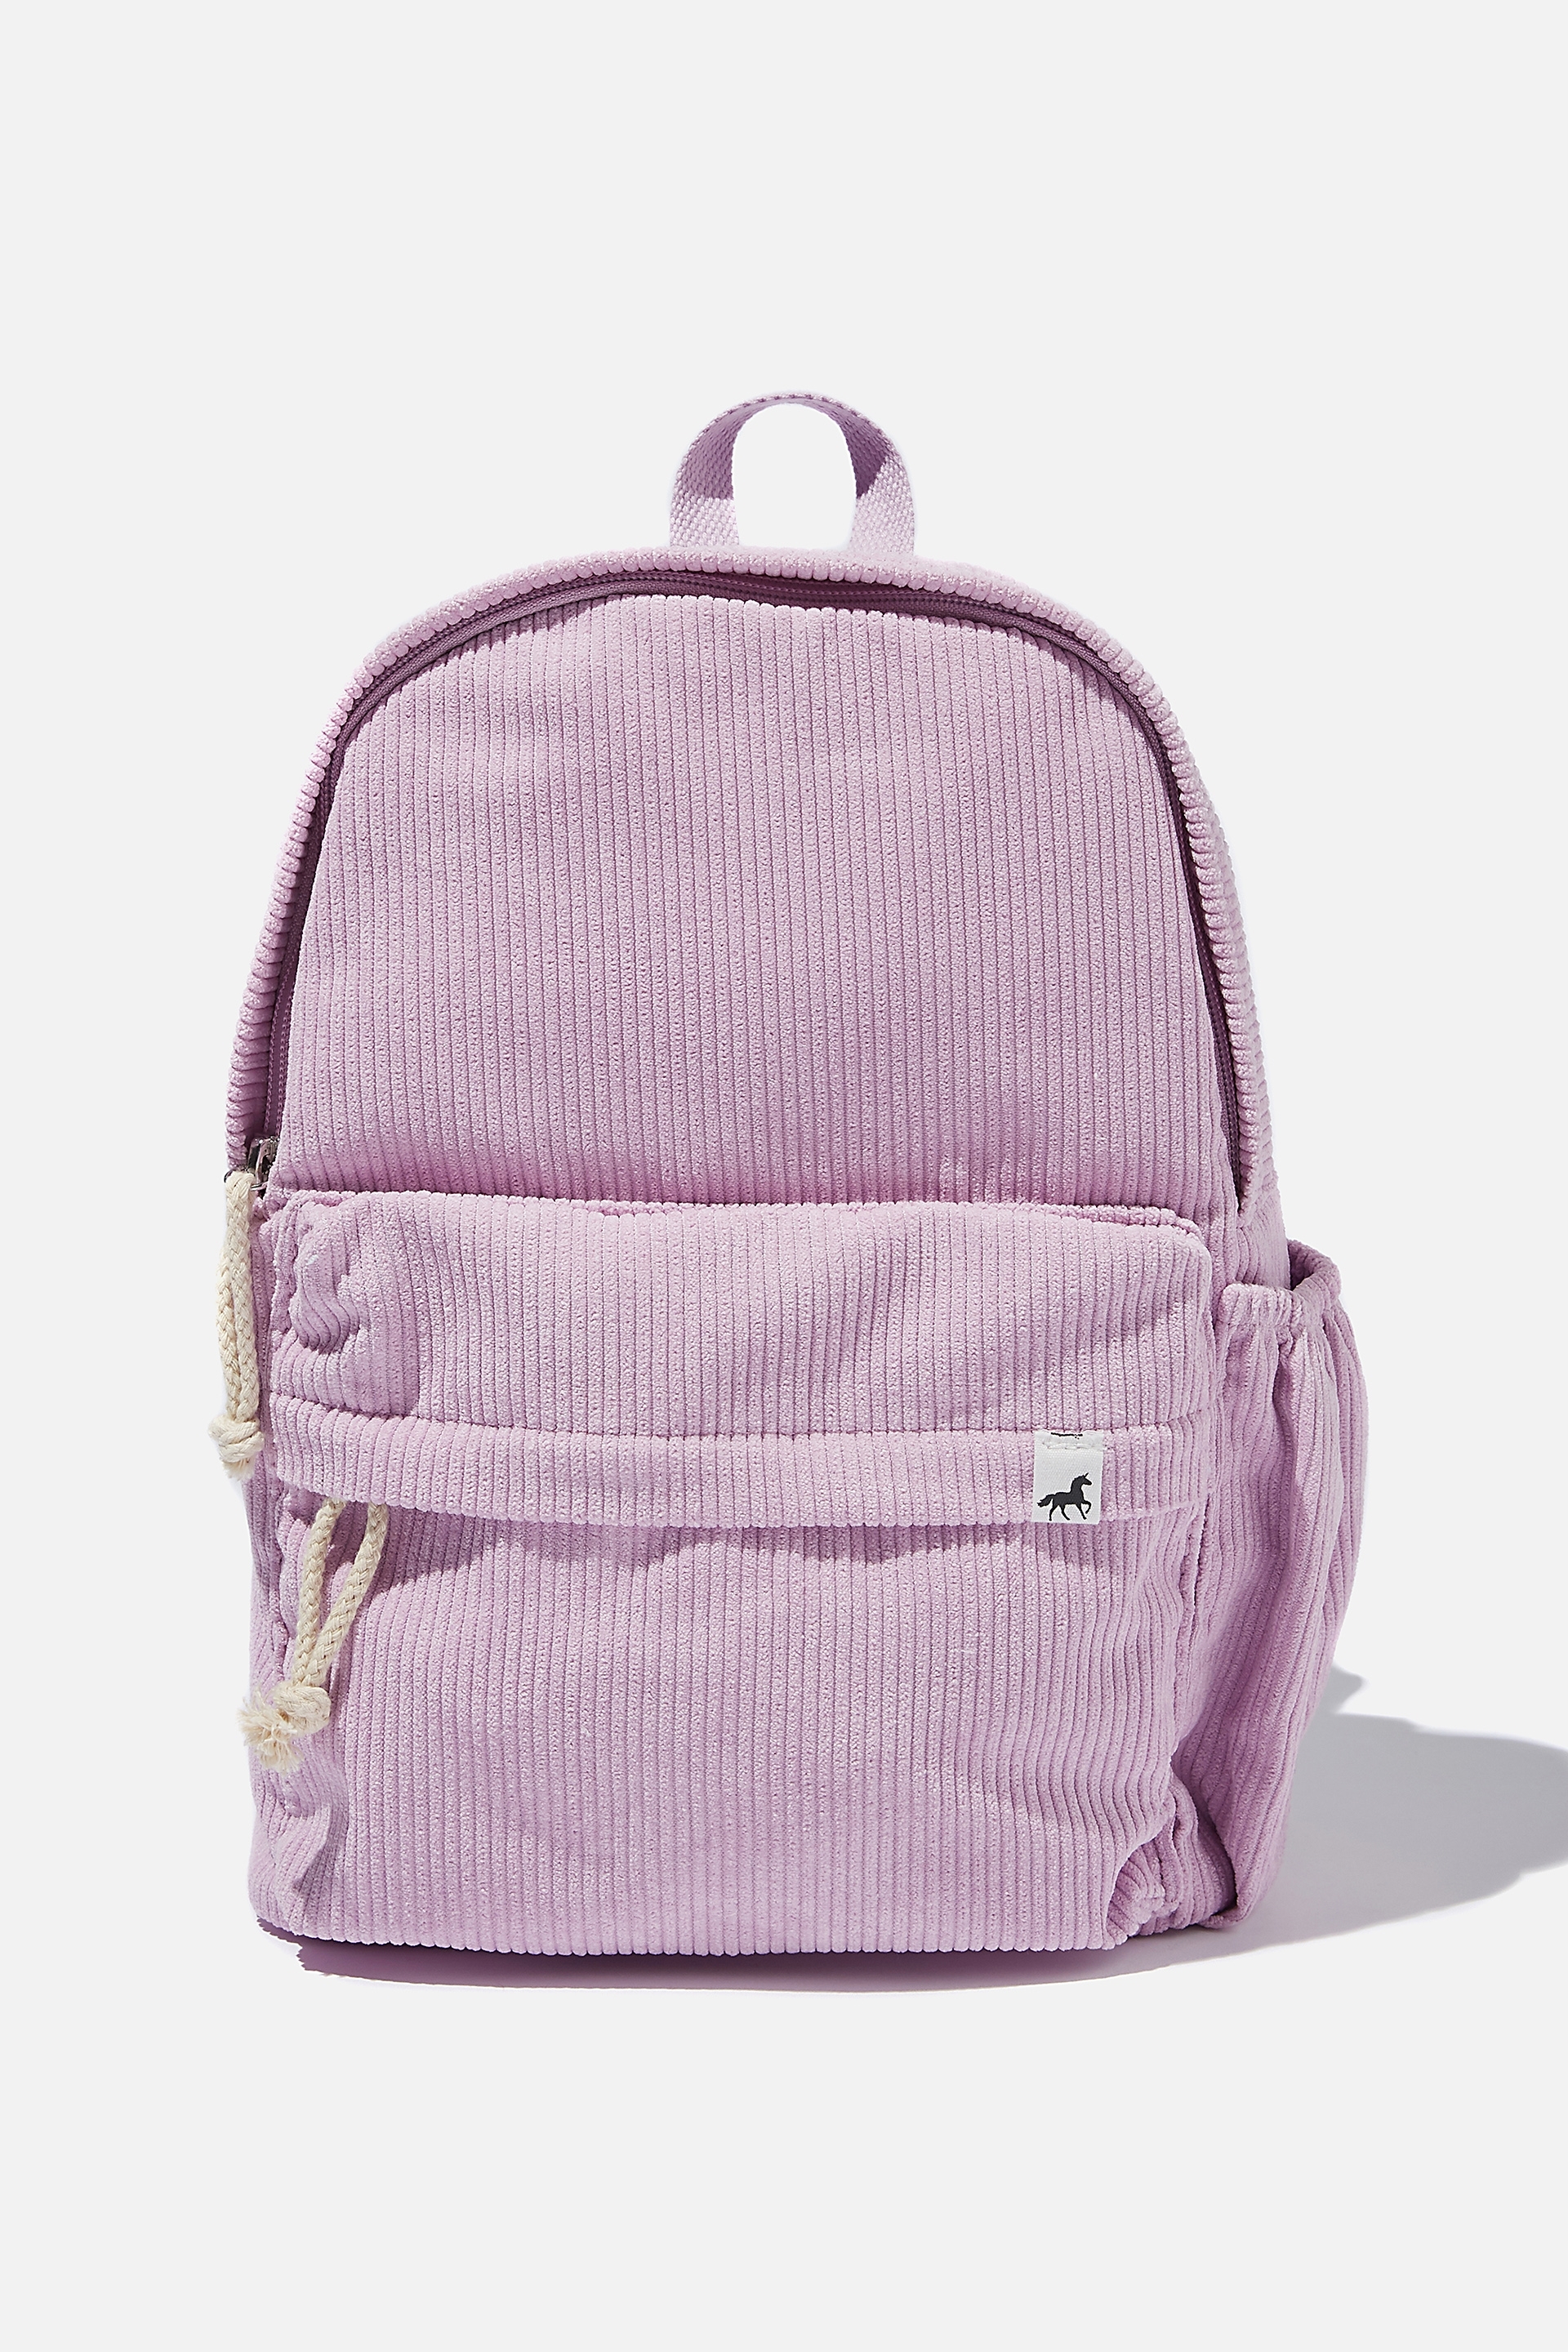 Cotton On Kids - Back To School Cord Backpack - Pale violet